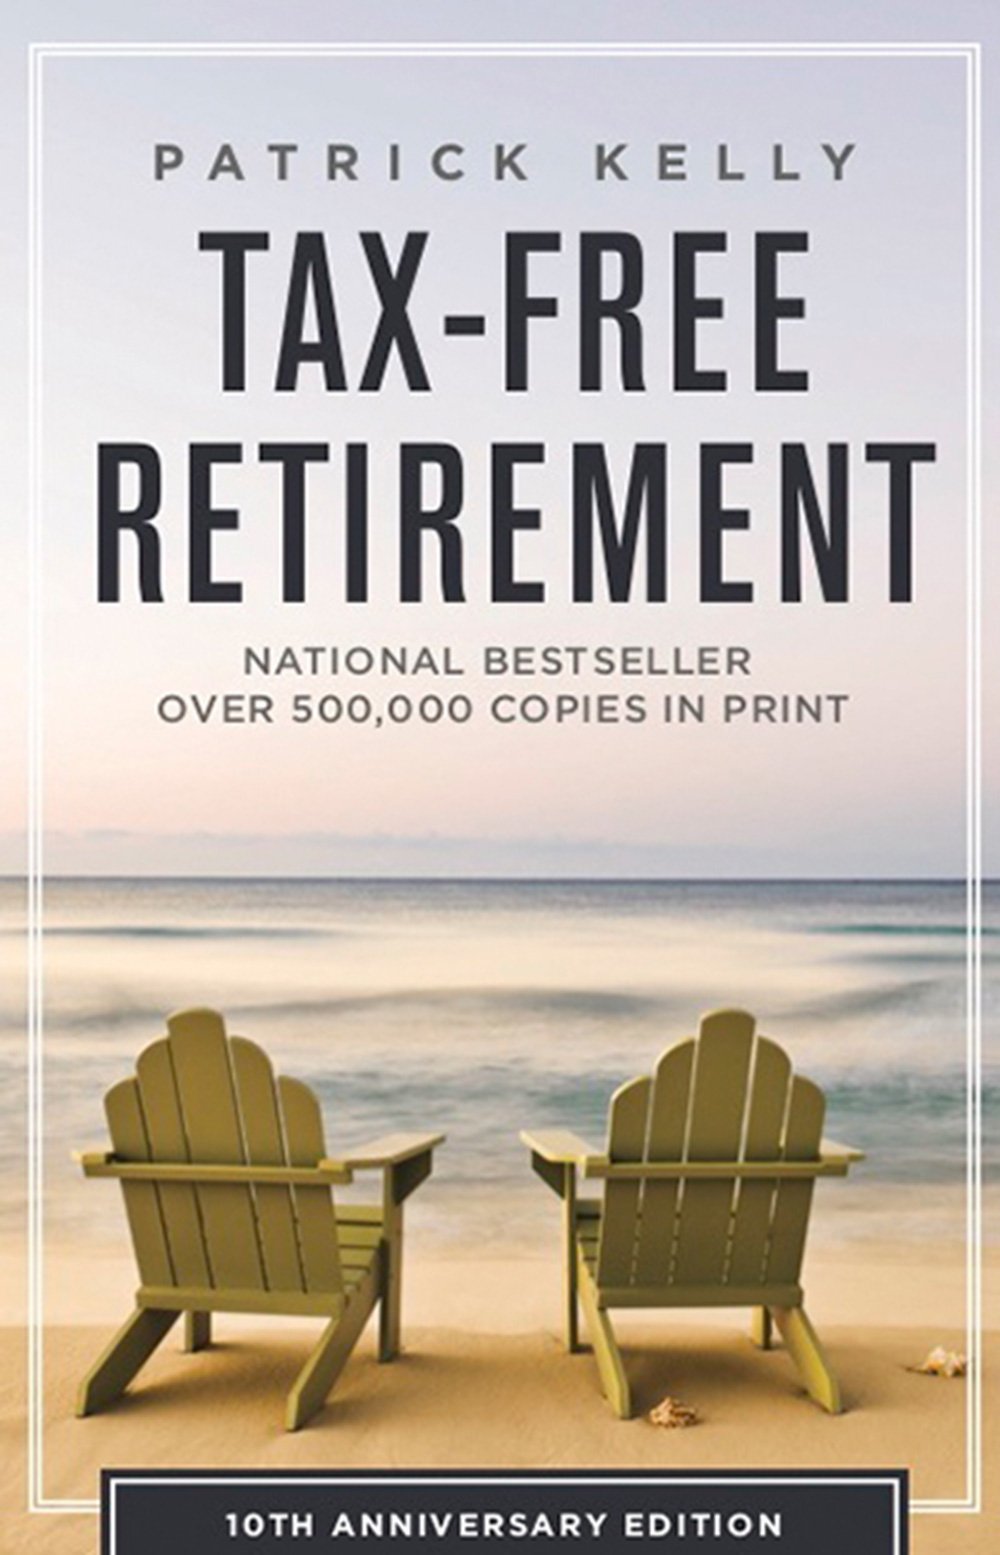 //www.demetriscurry.com/wp-content/uploads/2019/03/Tax-Free-Retirement-by-Patrick-Kelly-10th-Anniversary-Edition-By-Patrick-Kelly.jpg